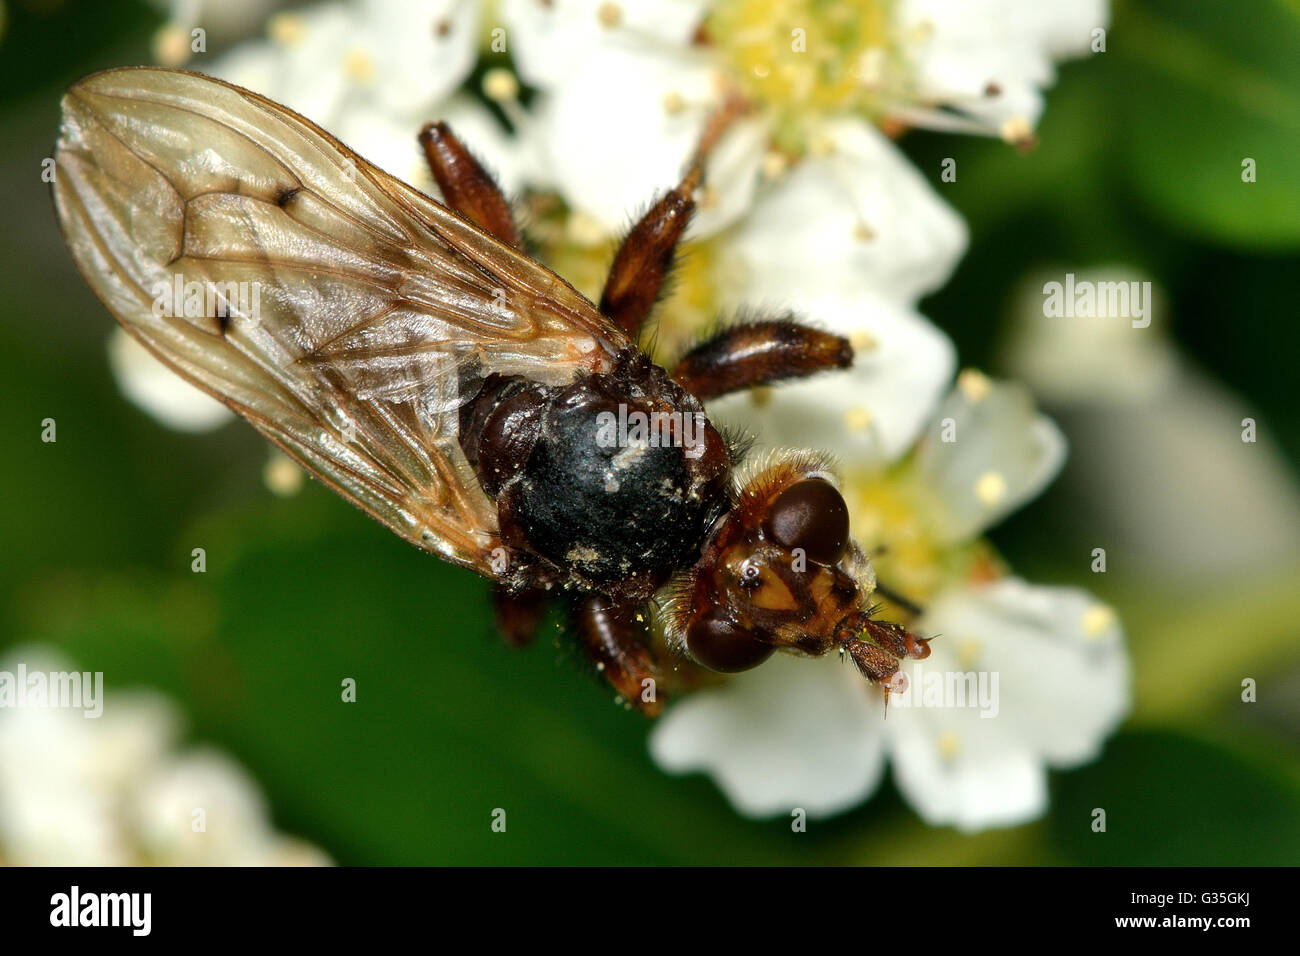 Myopa testacea conopid fly. Brown fly that hunts and paralyzes bees, in the family Conopidae Stock Photo